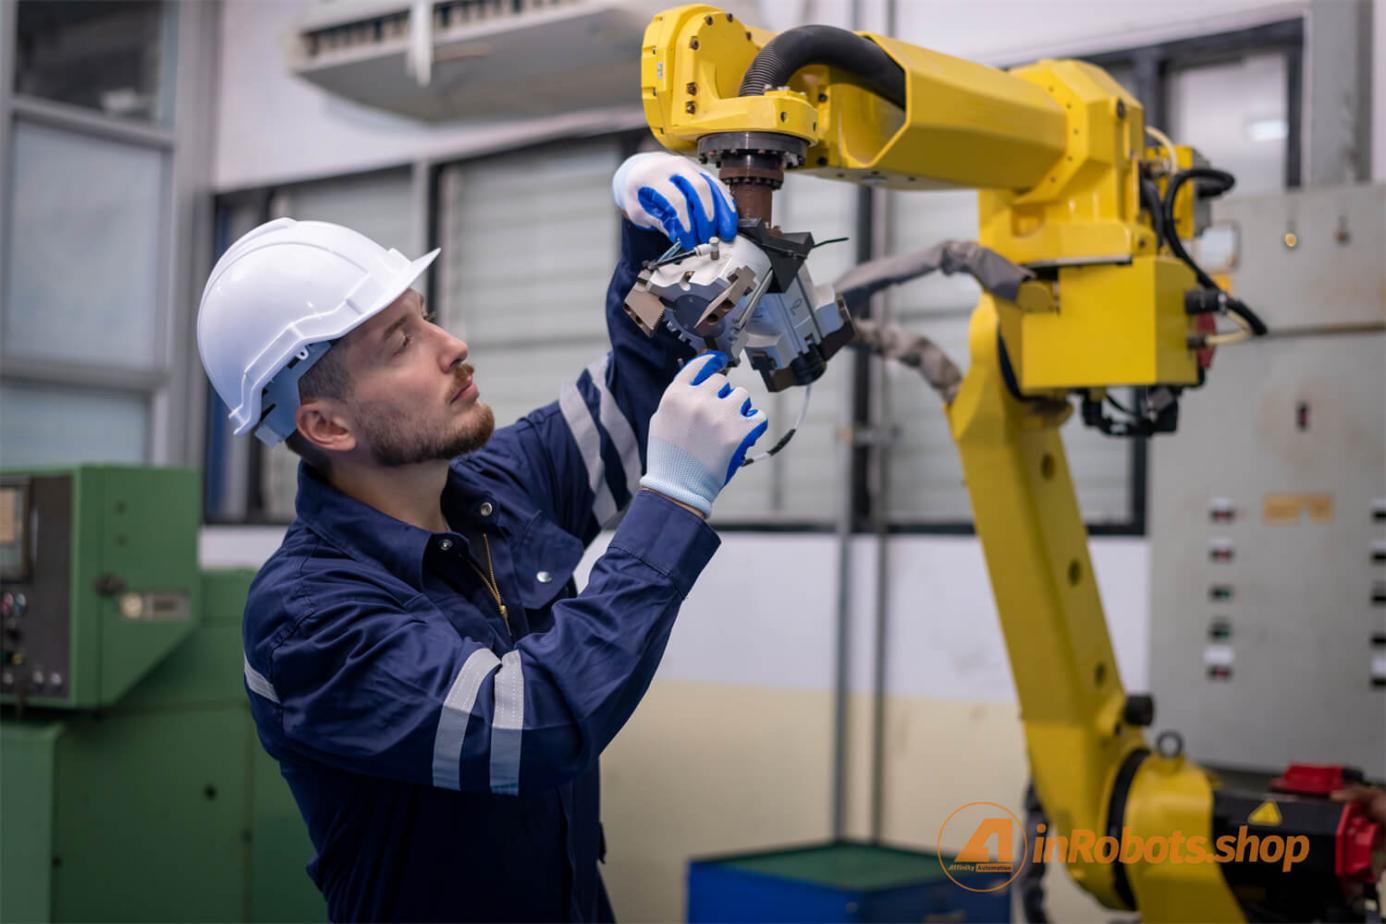 Industrial_Robot_Maintenance_Keeping_Your_Robots_at_Their Best_inRobotsshop2